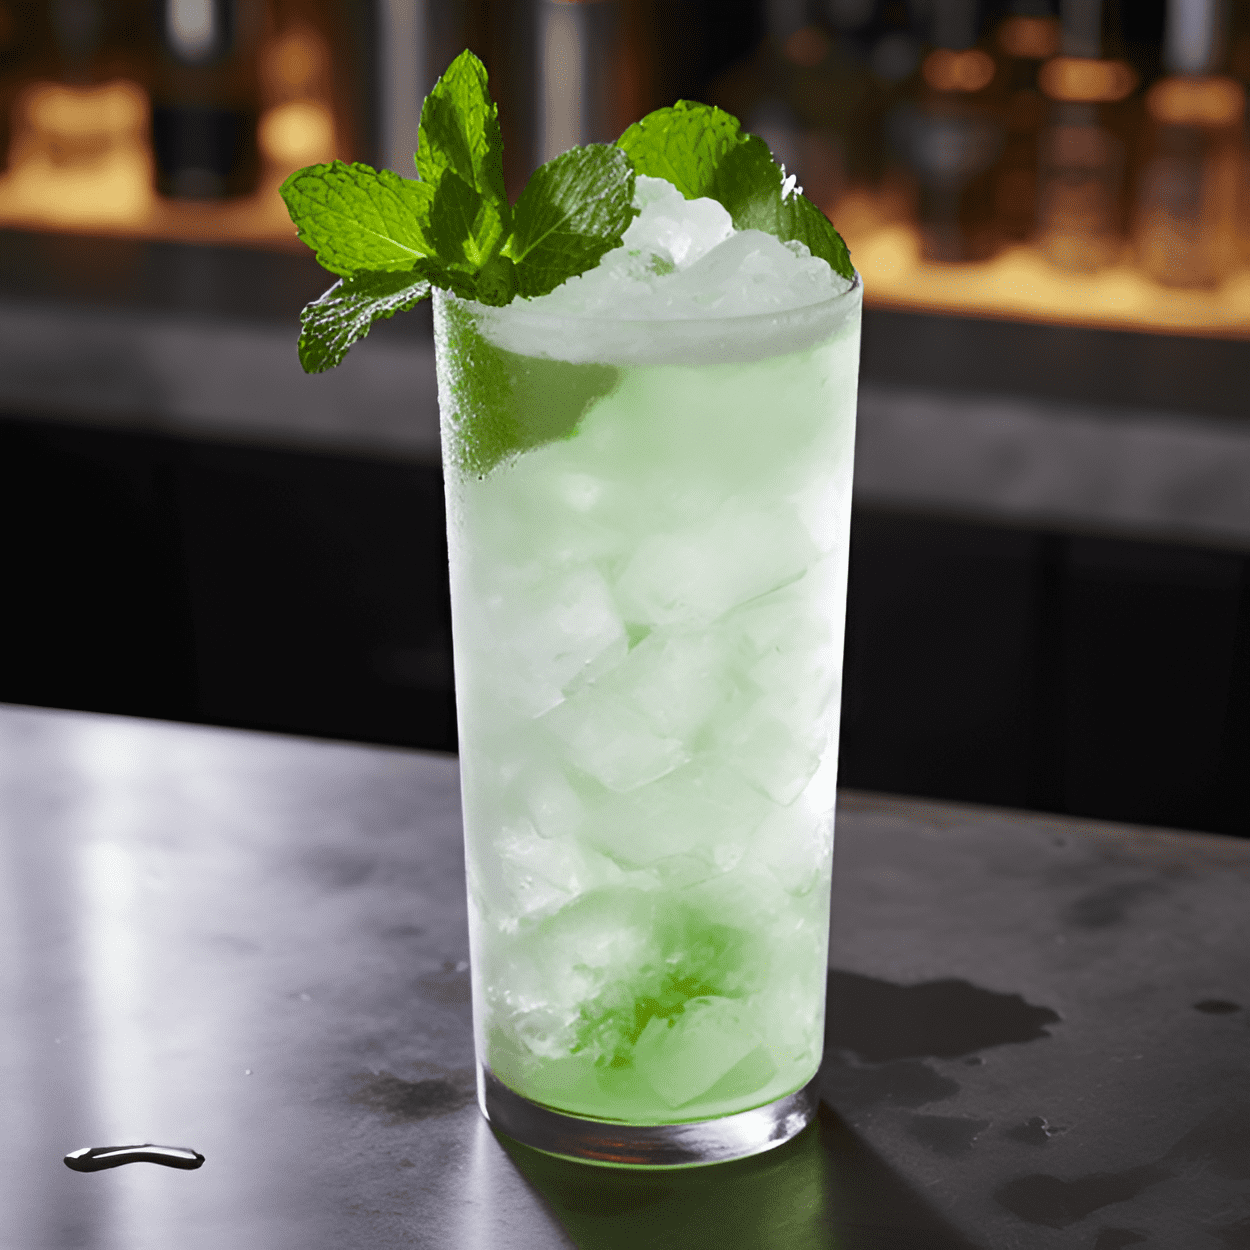 The Snake In The Grass cocktail is a delightful mix of sweet, sour, and herbaceous flavors. The gin provides a strong, juniper-forward base, while the lemon juice adds a tangy sourness. The simple syrup balances out the sourness with a touch of sweetness, and the mint leaves lend a refreshing, herbaceous note.